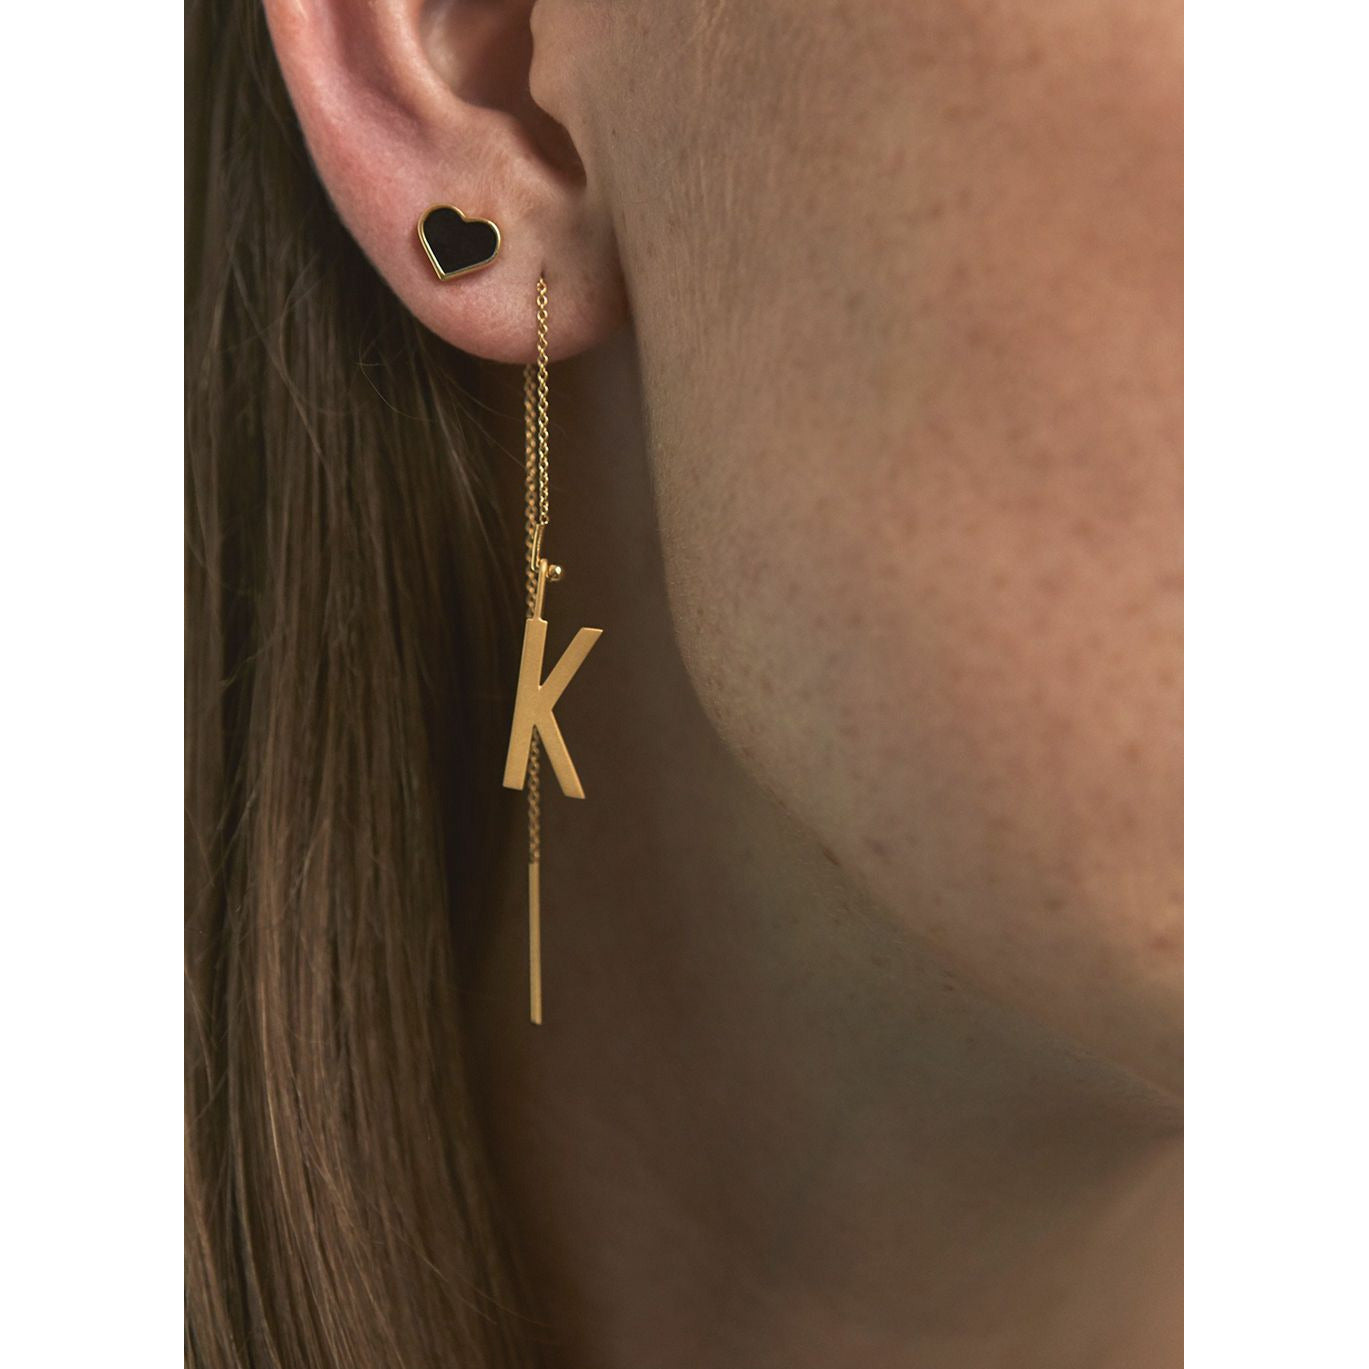 Design Letters Earring's emailster, wit/zilver